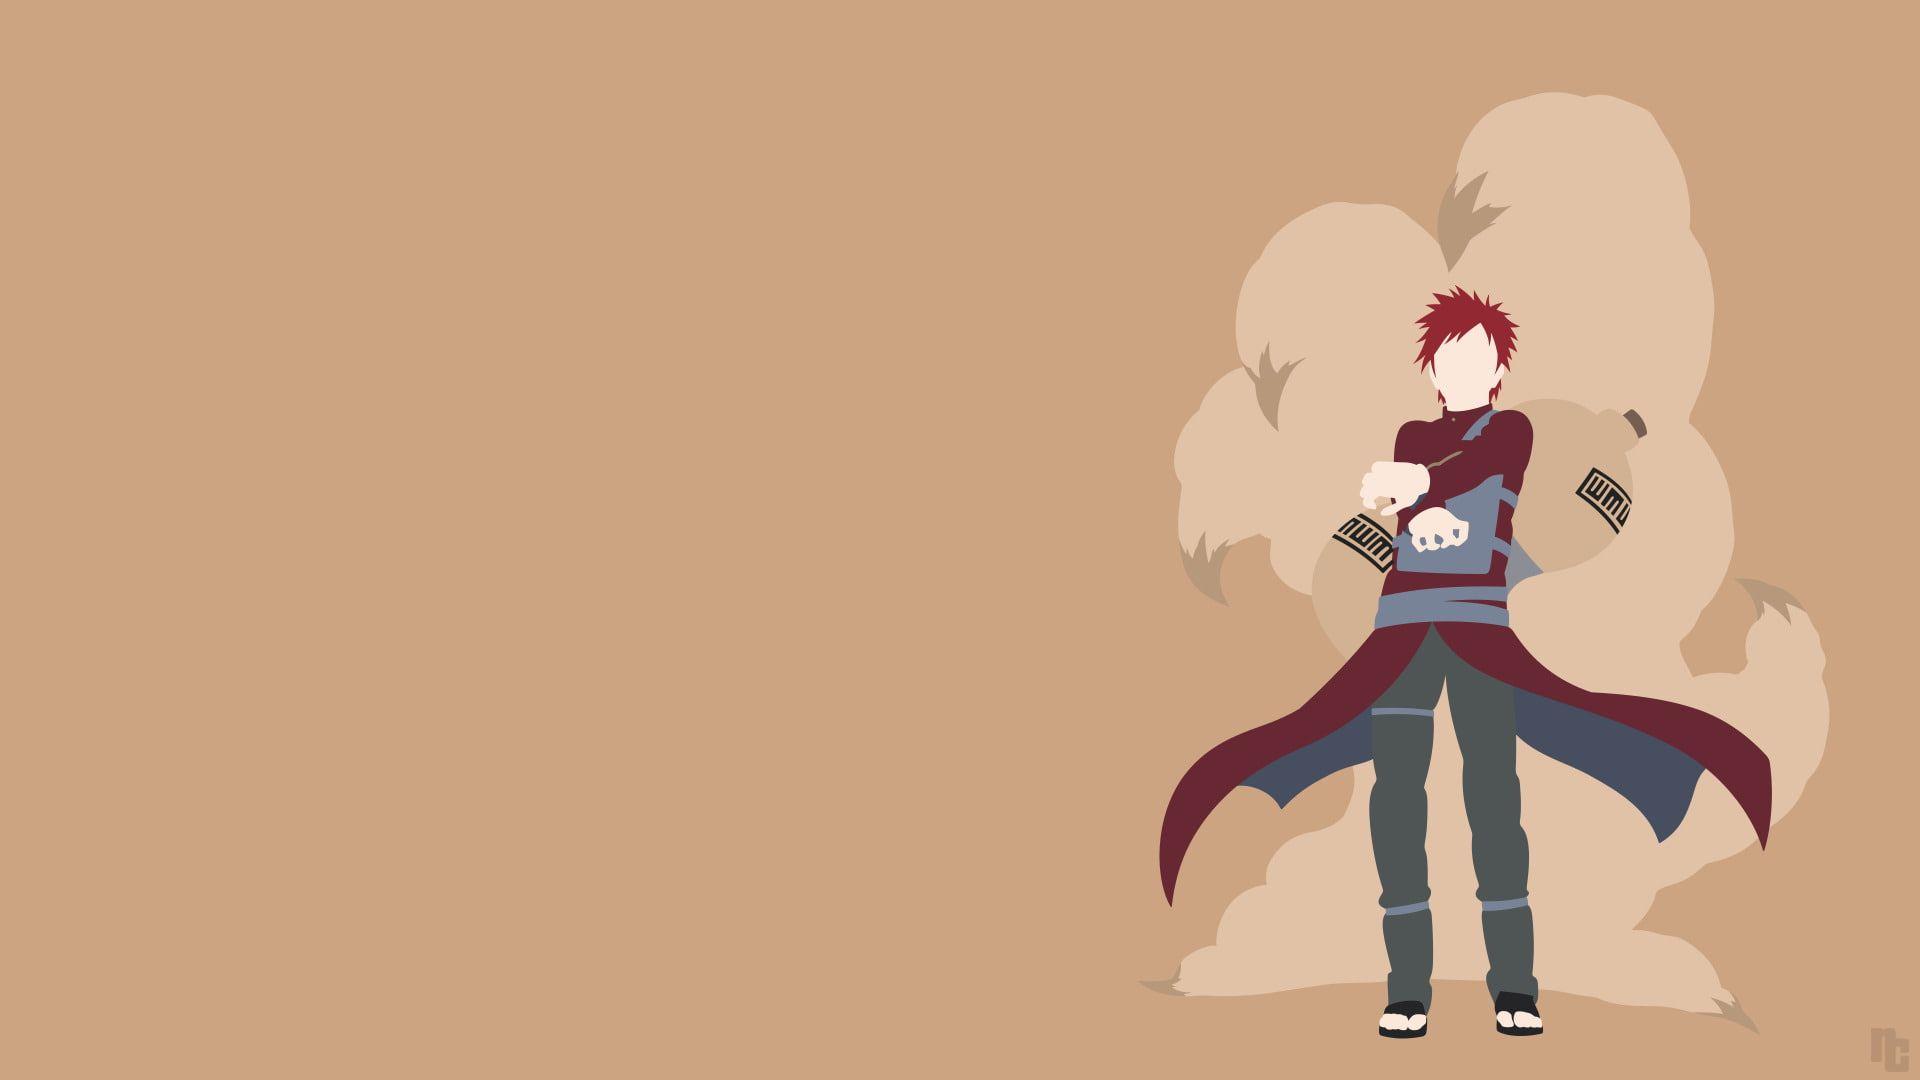 Download Gaara Wallpapers HD 4K MOD APK v10 for Android